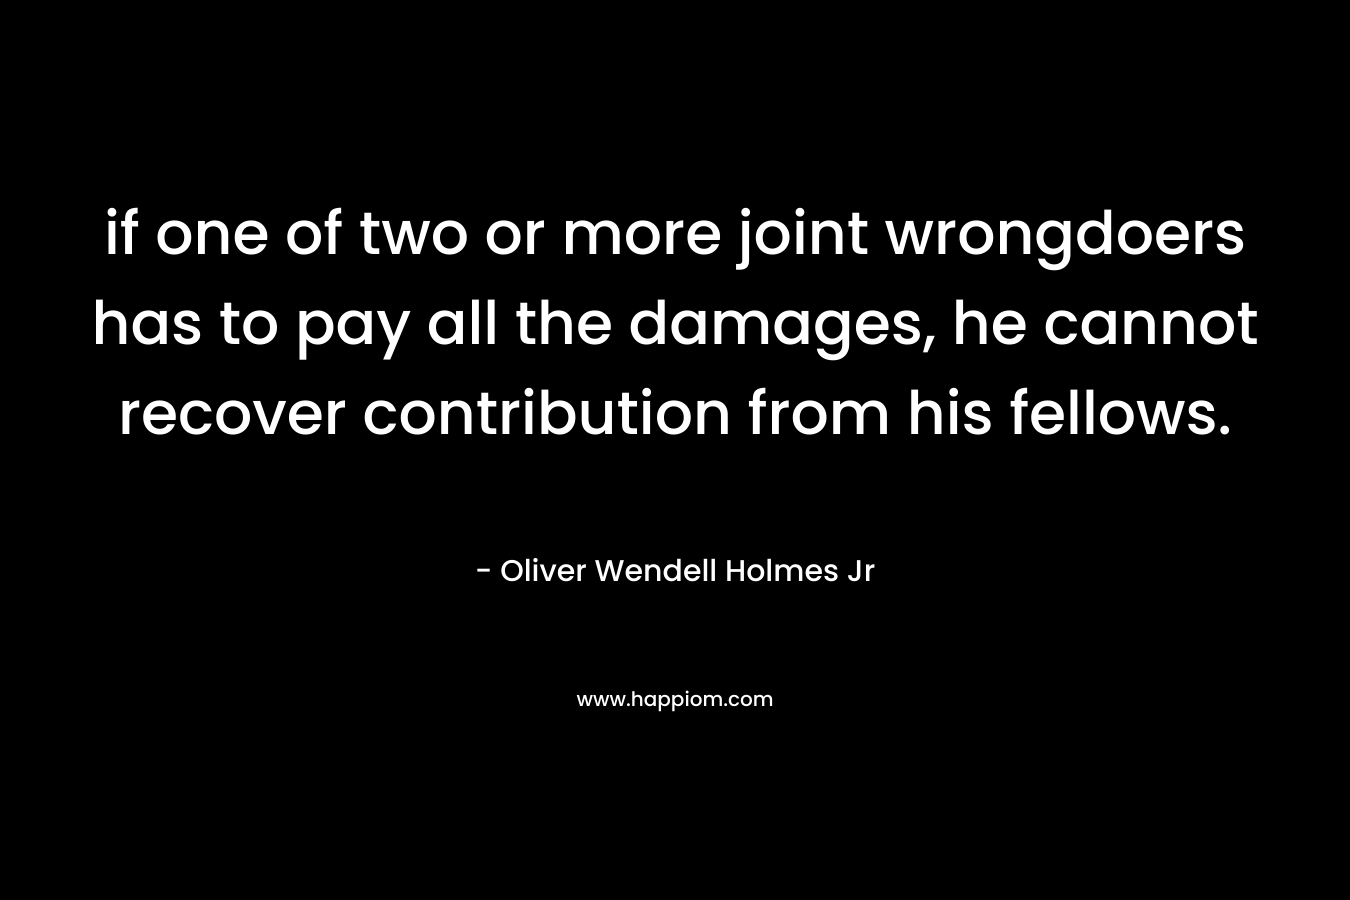 if one of two or more joint wrongdoers has to pay all the damages, he cannot recover contribution from his fellows. – Oliver Wendell Holmes Jr